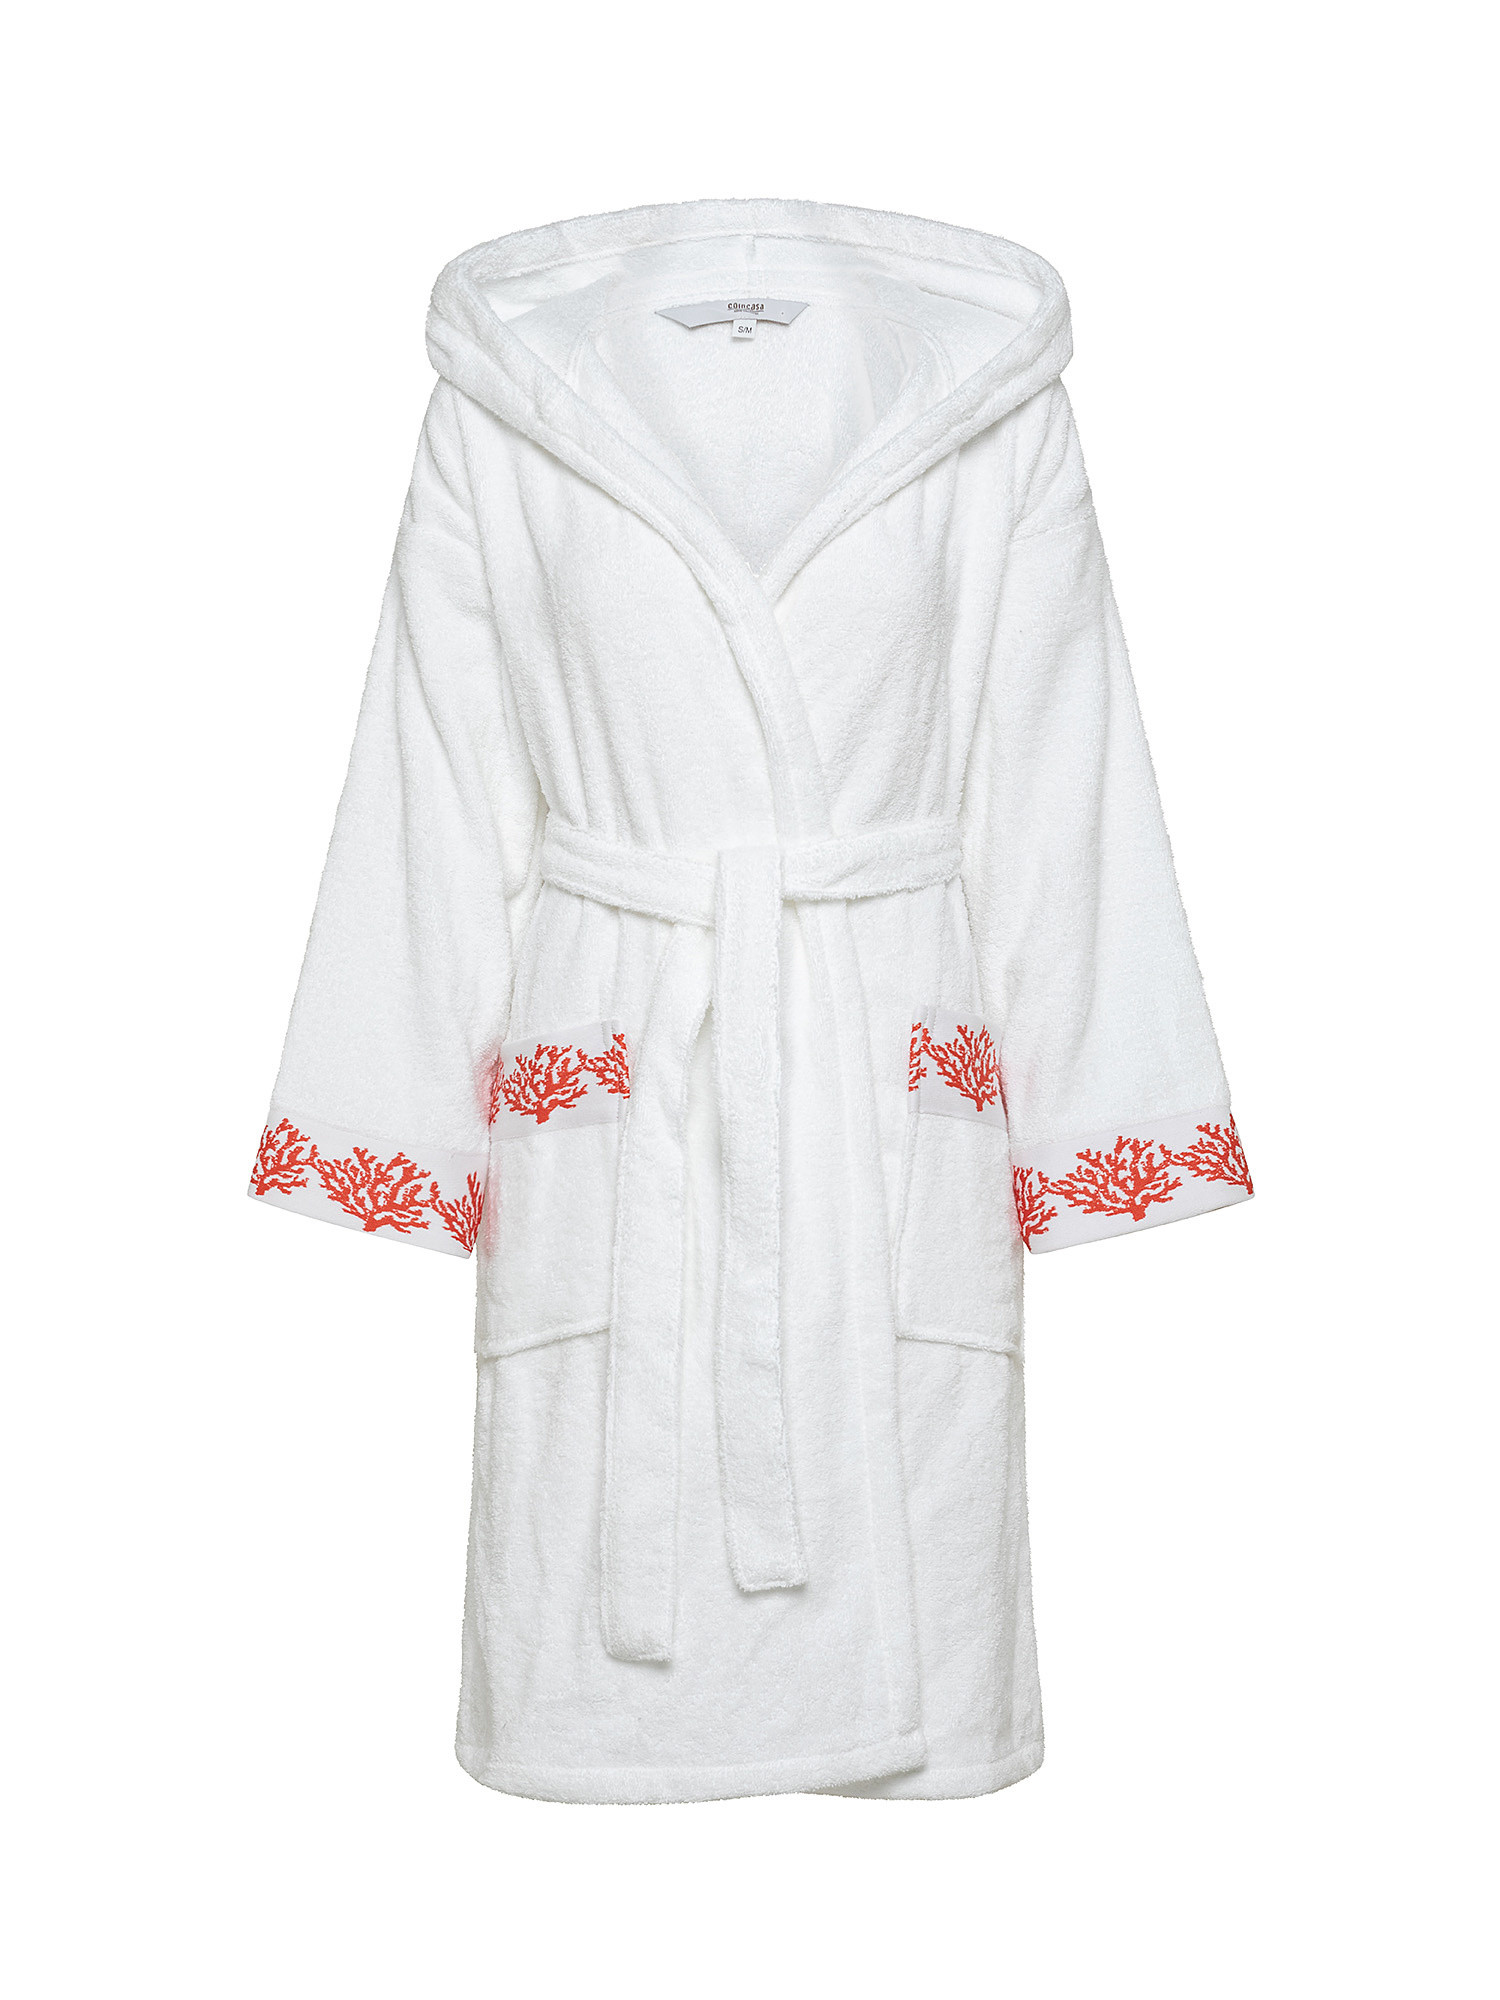 Terry cotton bathrobe with coral embroidery, White, large image number 0